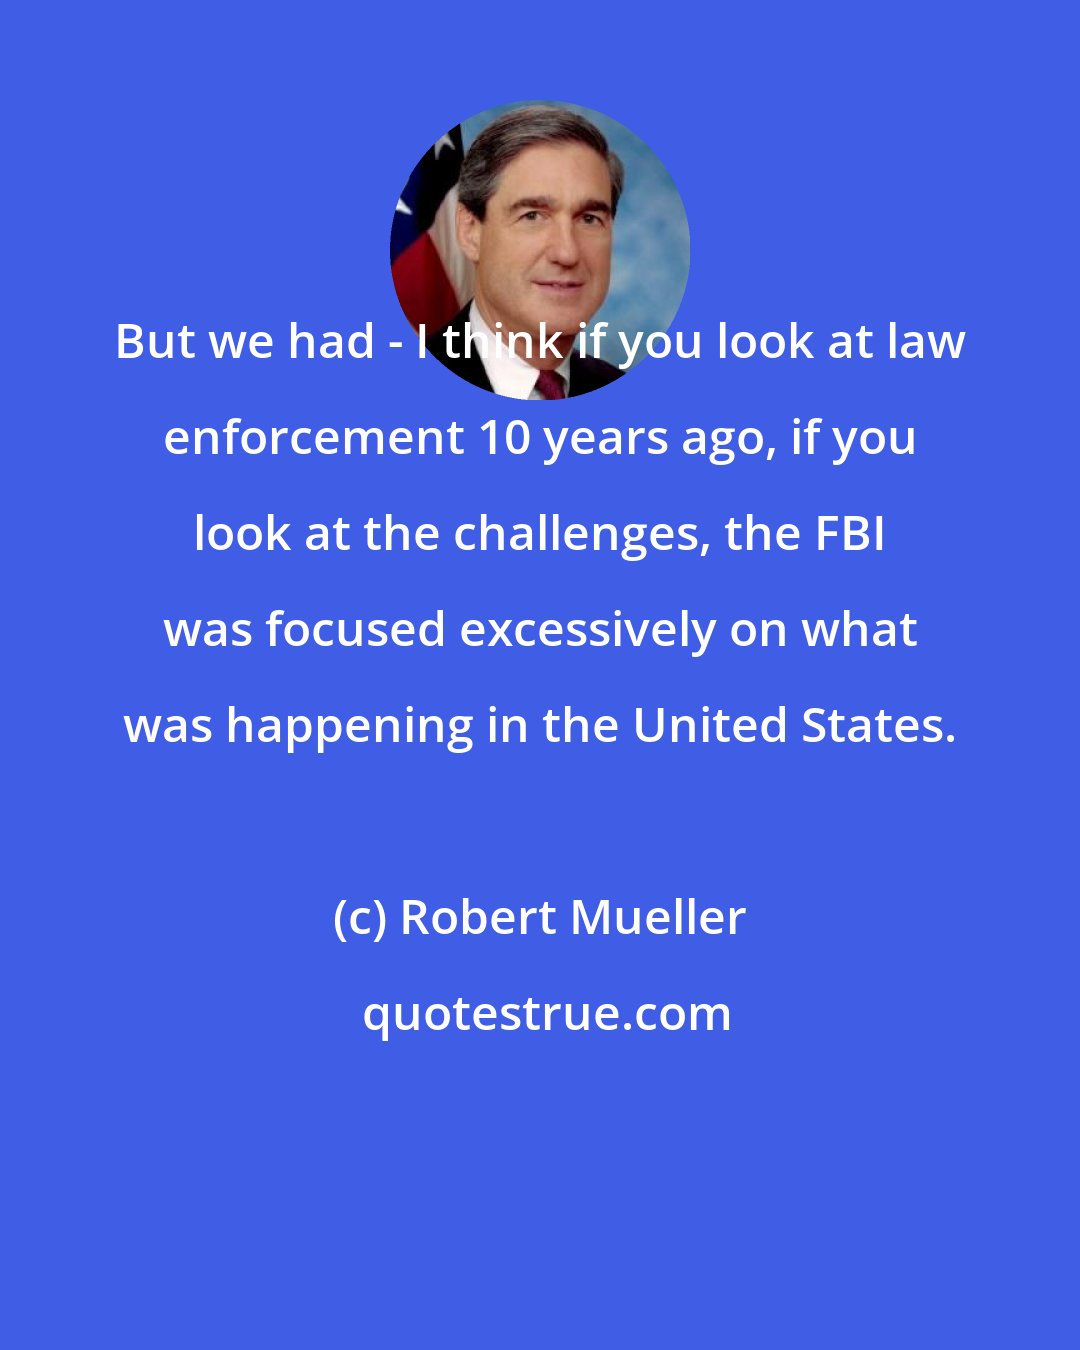 Robert Mueller: But we had - I think if you look at law enforcement 10 years ago, if you look at the challenges, the FBI was focused excessively on what was happening in the United States.